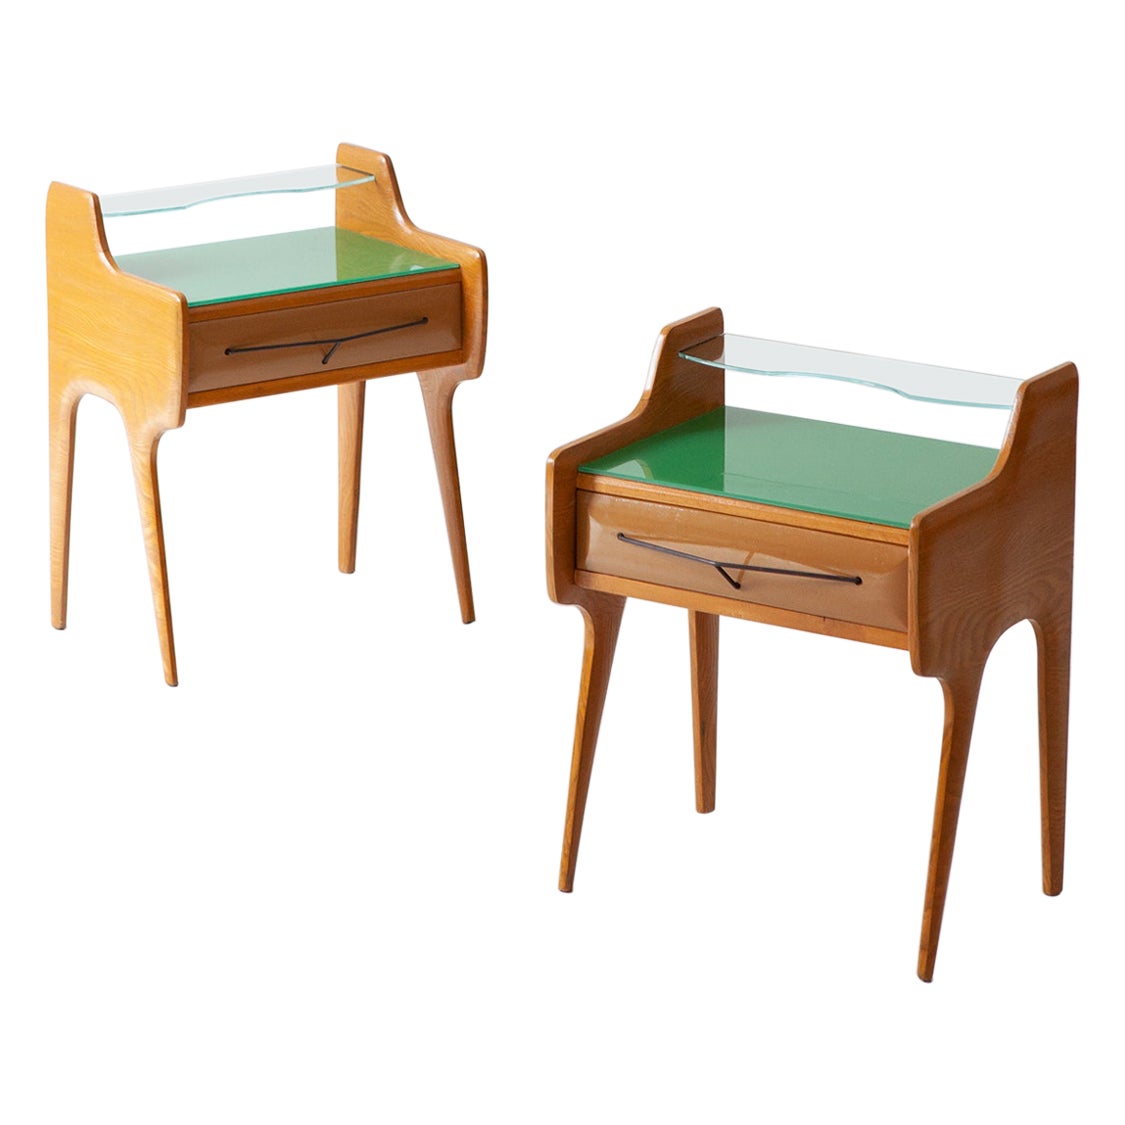 Pair of Bedside Tables in Oak with Green Glass Top, Italy, 1950s